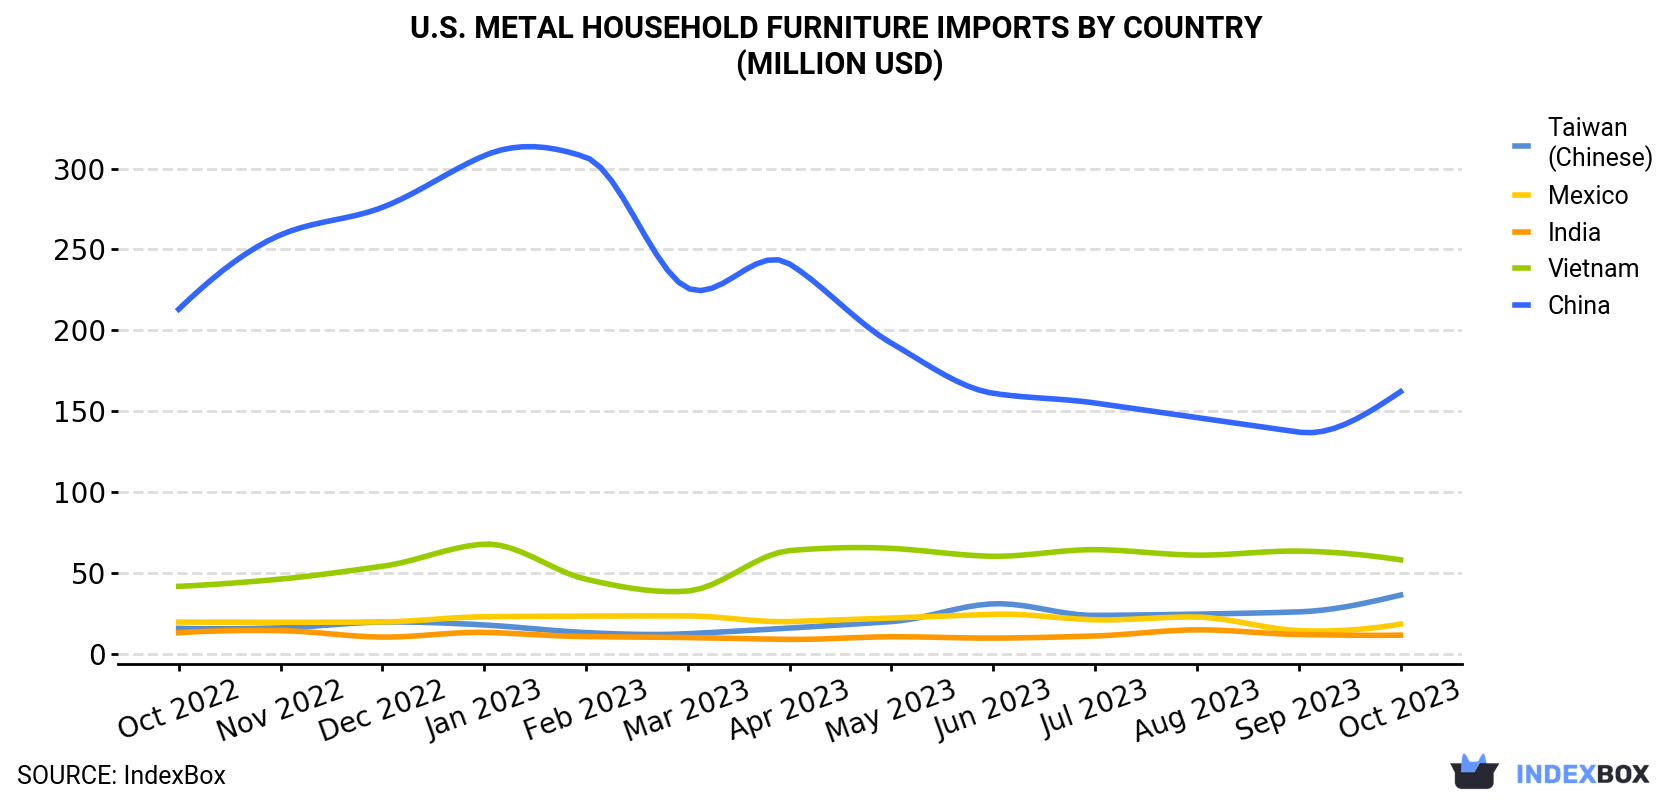 U.S. Metal Household Furniture Imports By Country (Million USD)